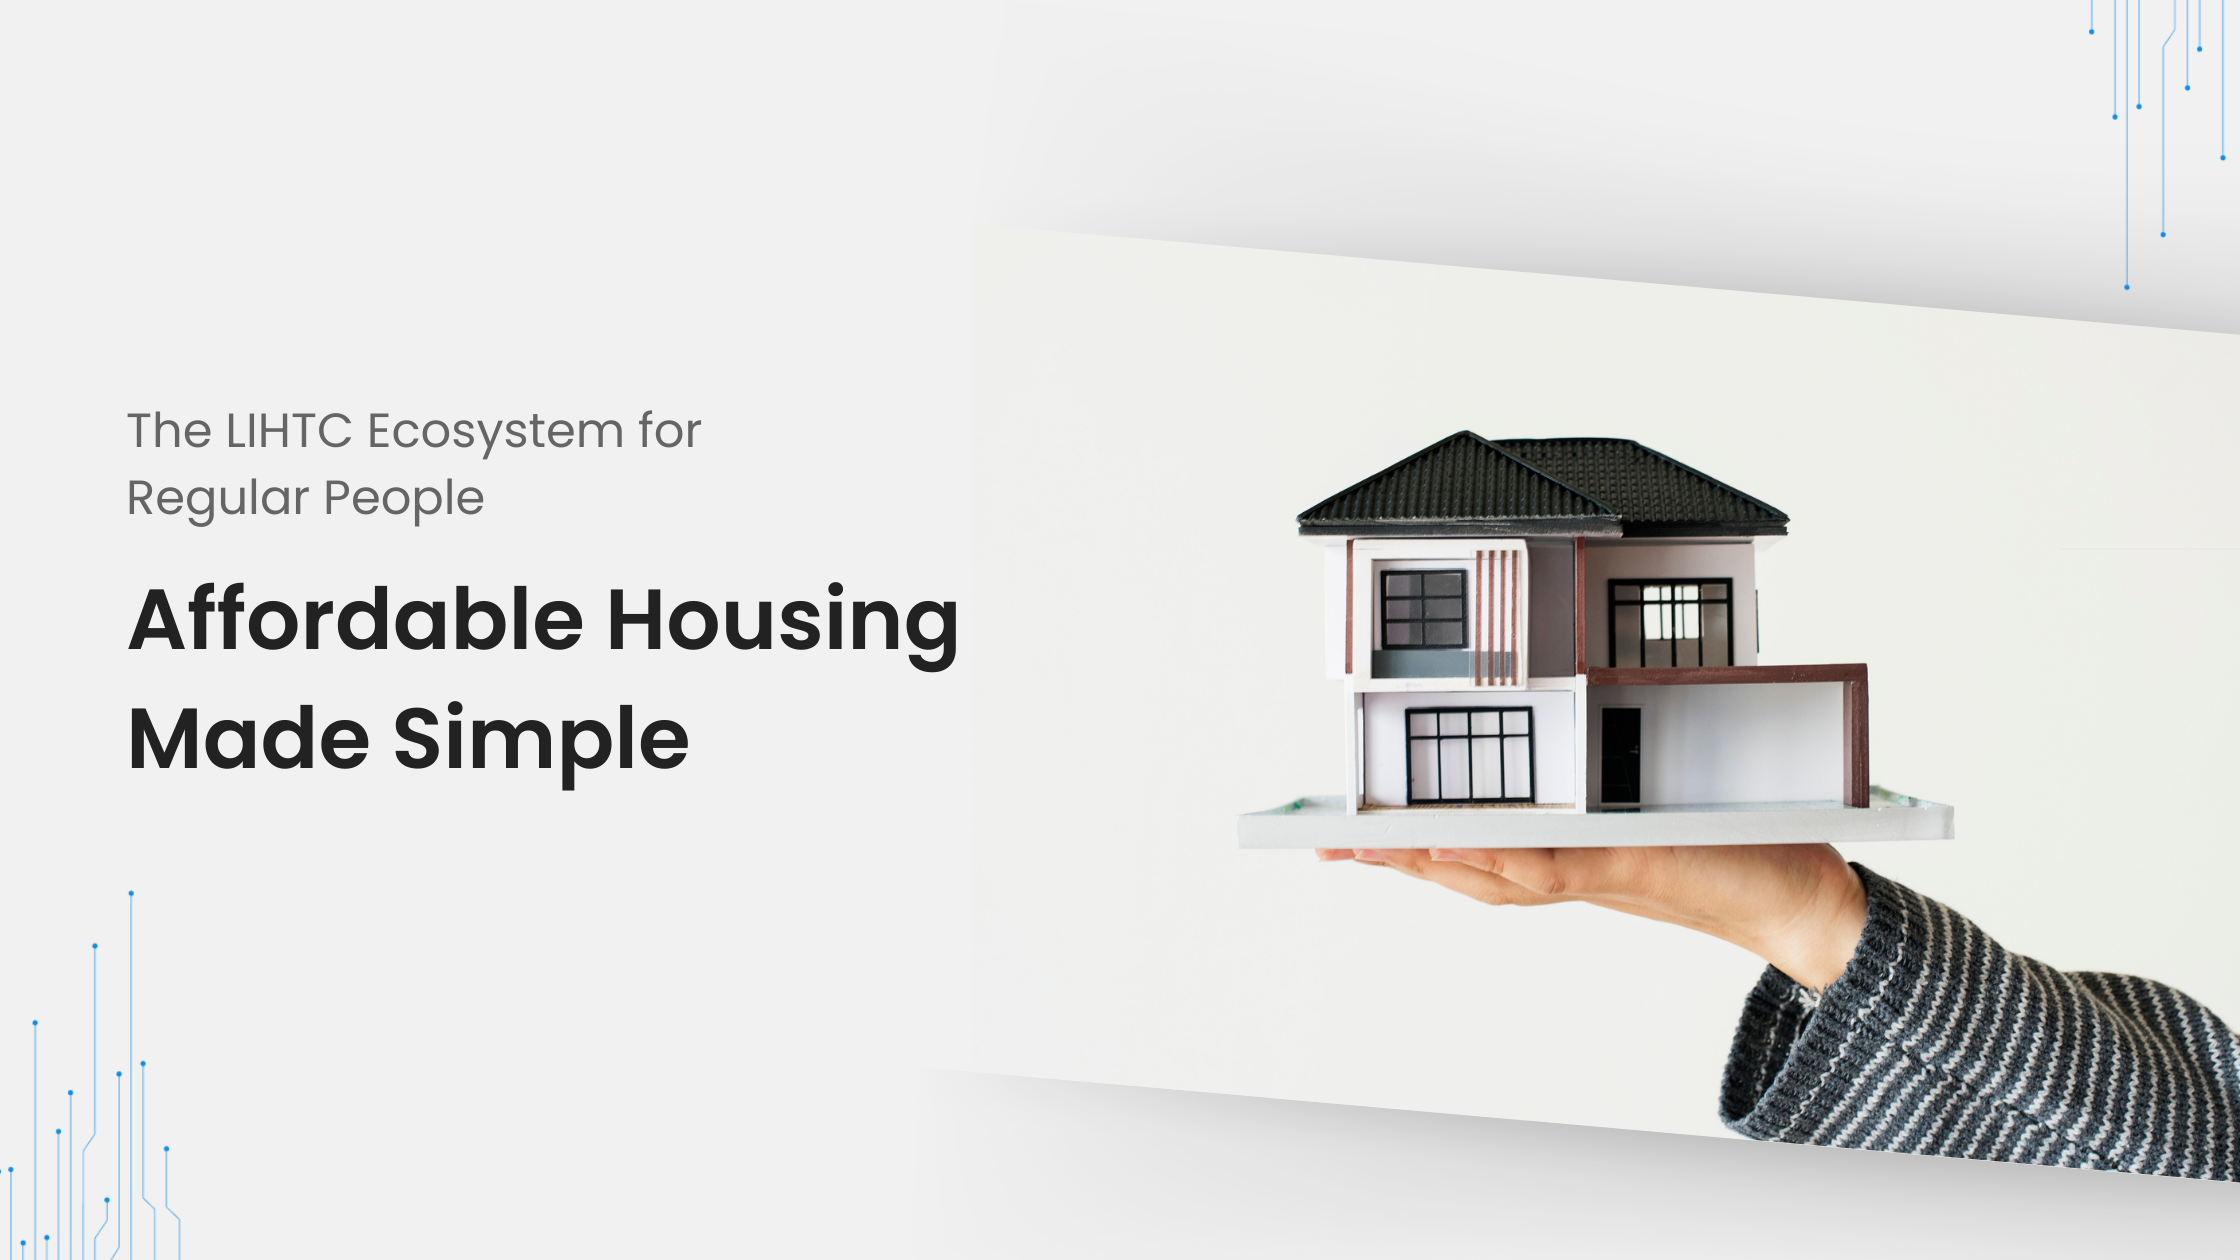 The LIHTC Ecosystem for Regular People – Affordable Housing Made Simple